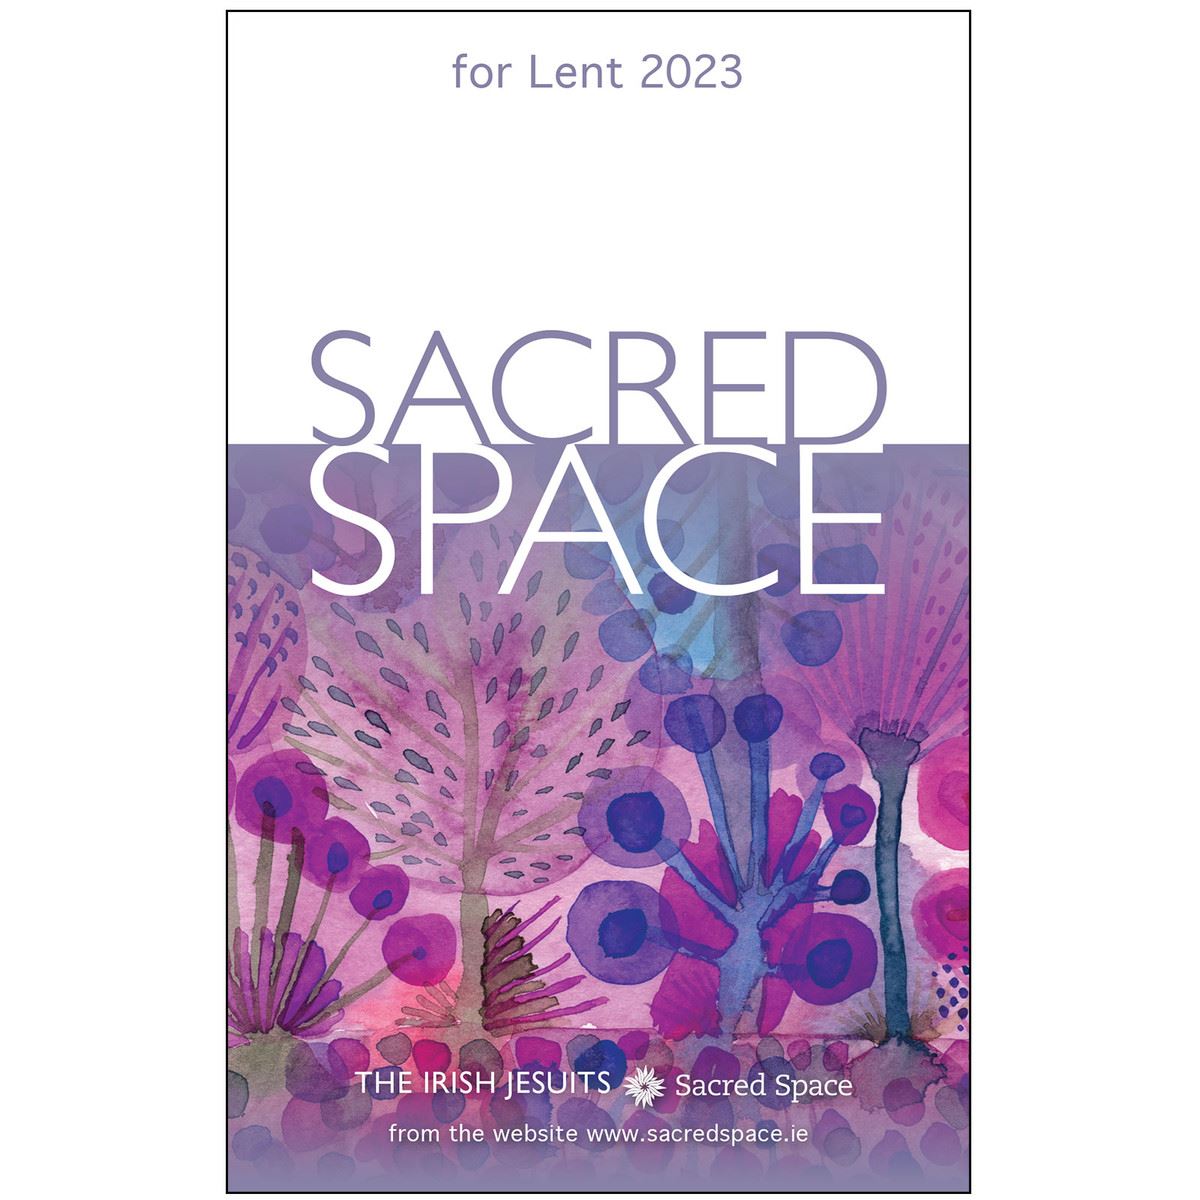 Sacred Space for Lent 2023 By: The Irish Jesuits